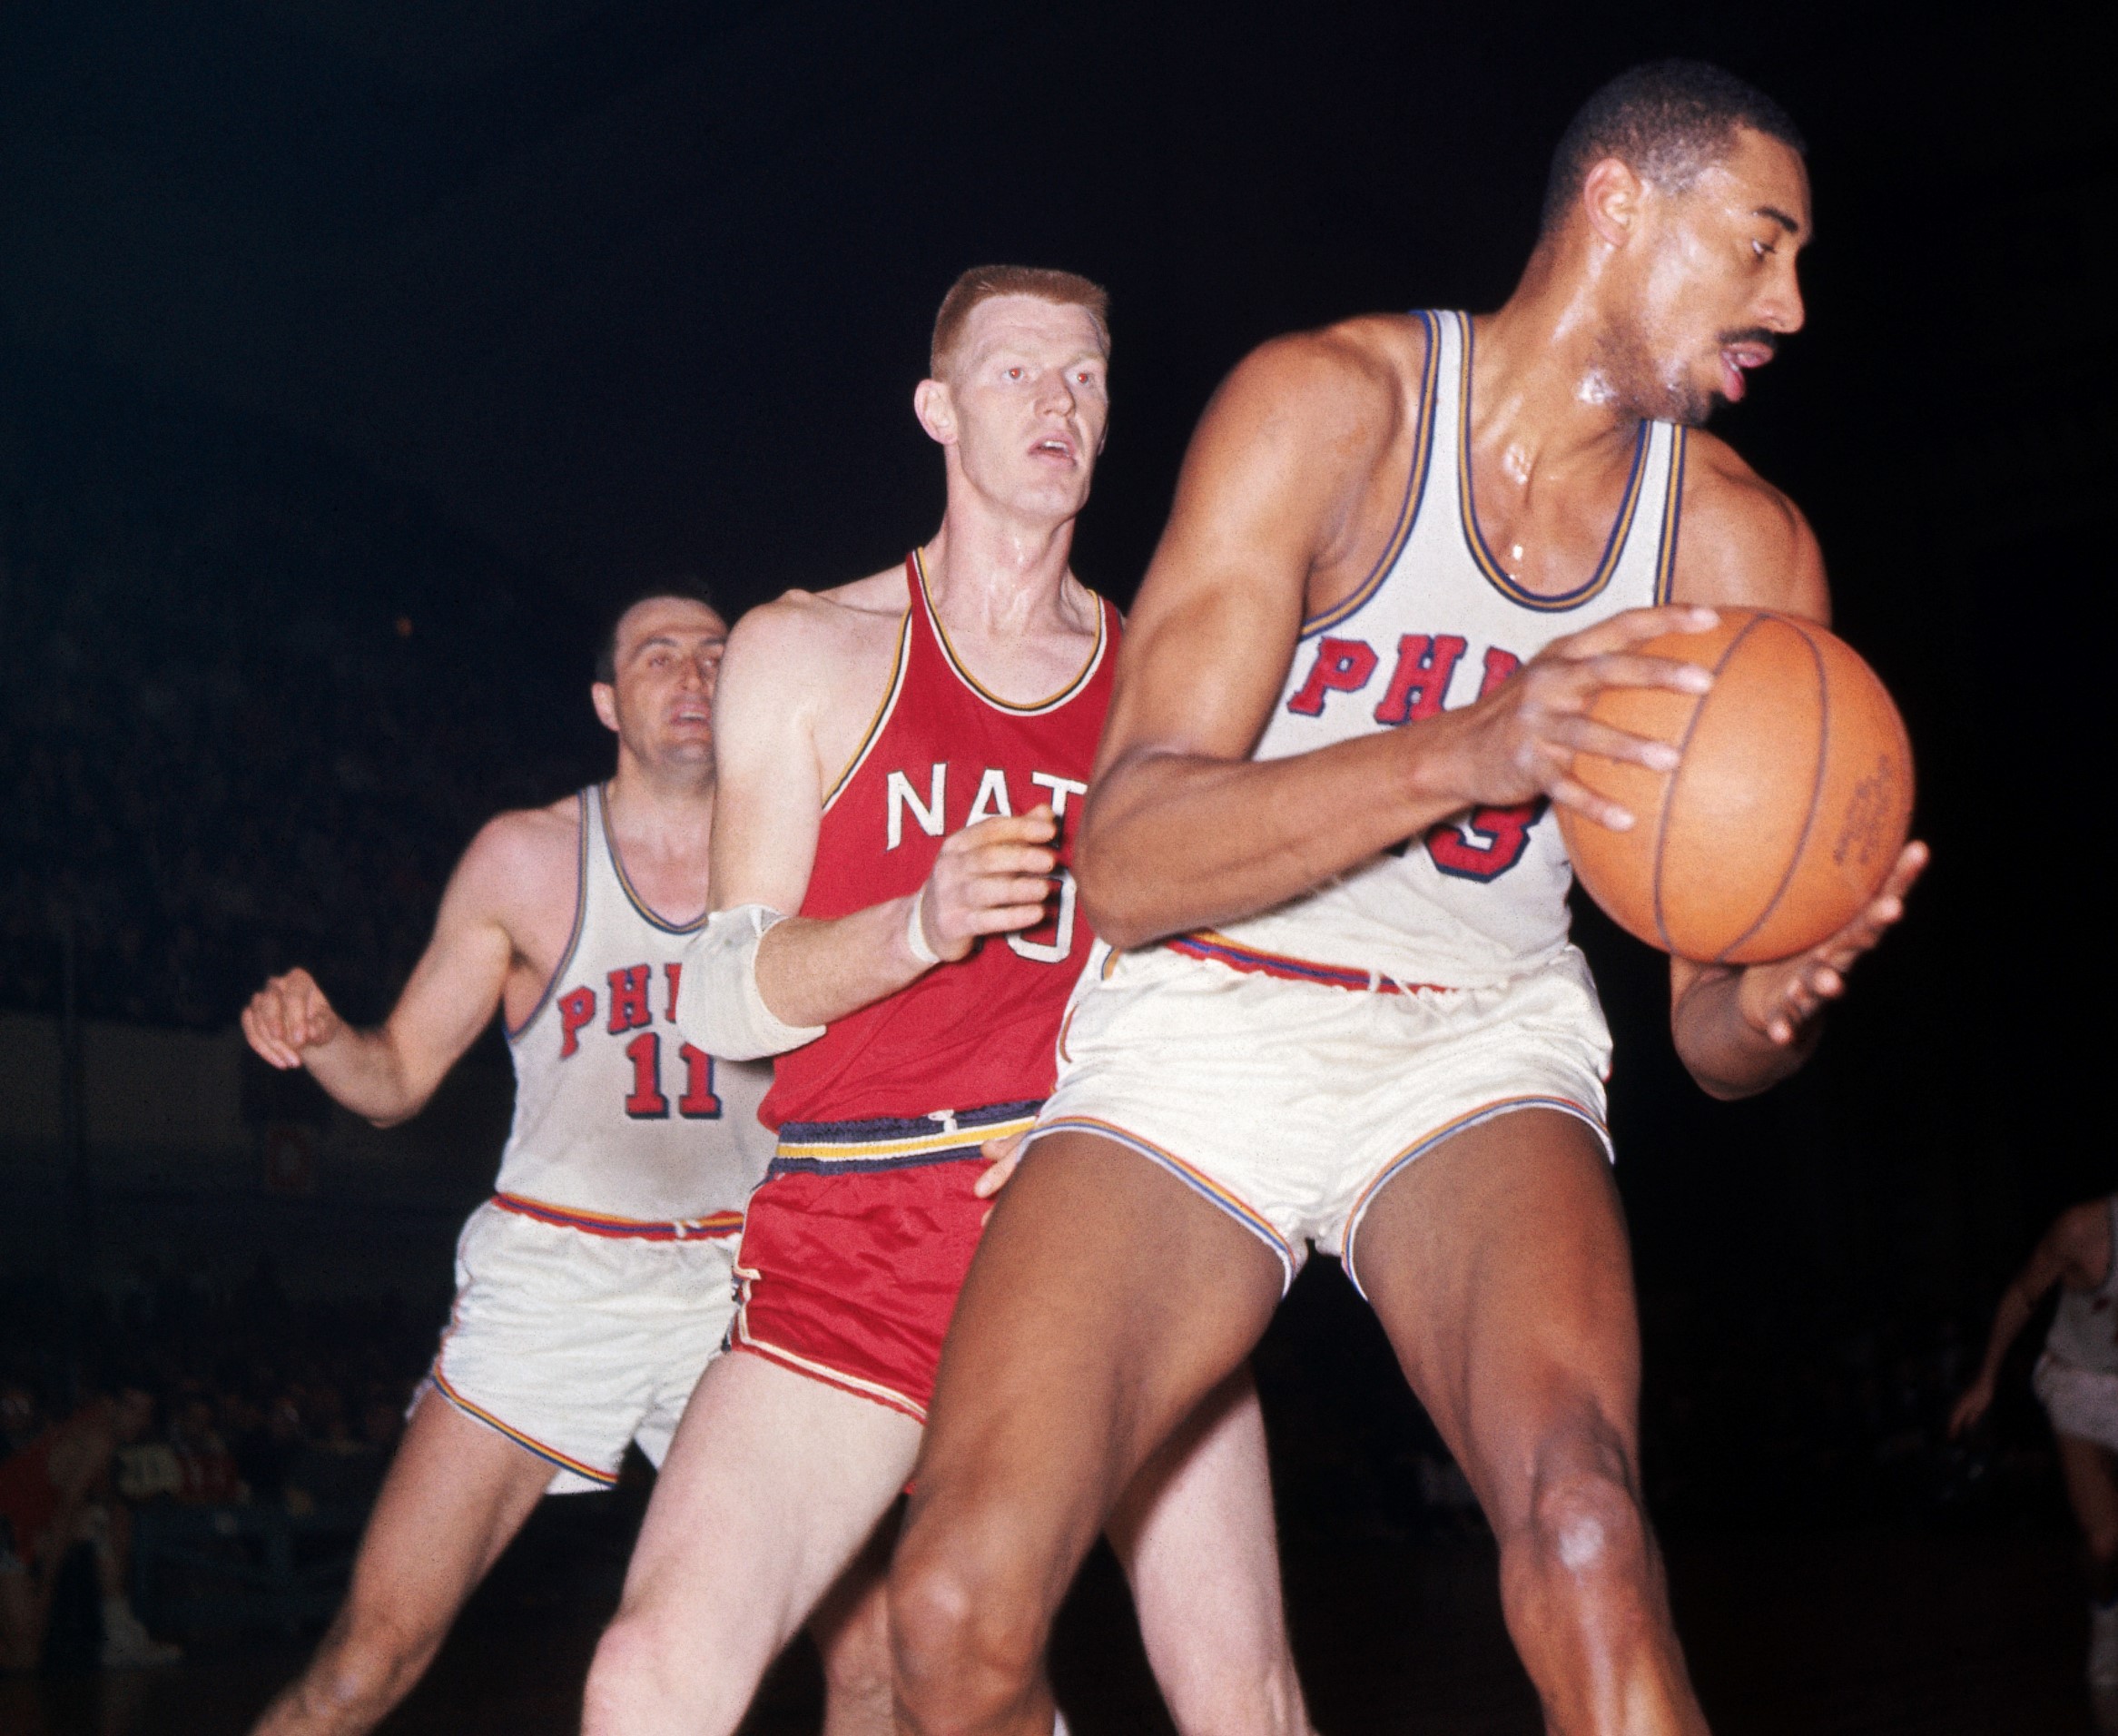 Wilt Chamberlain comes down with the rebound.